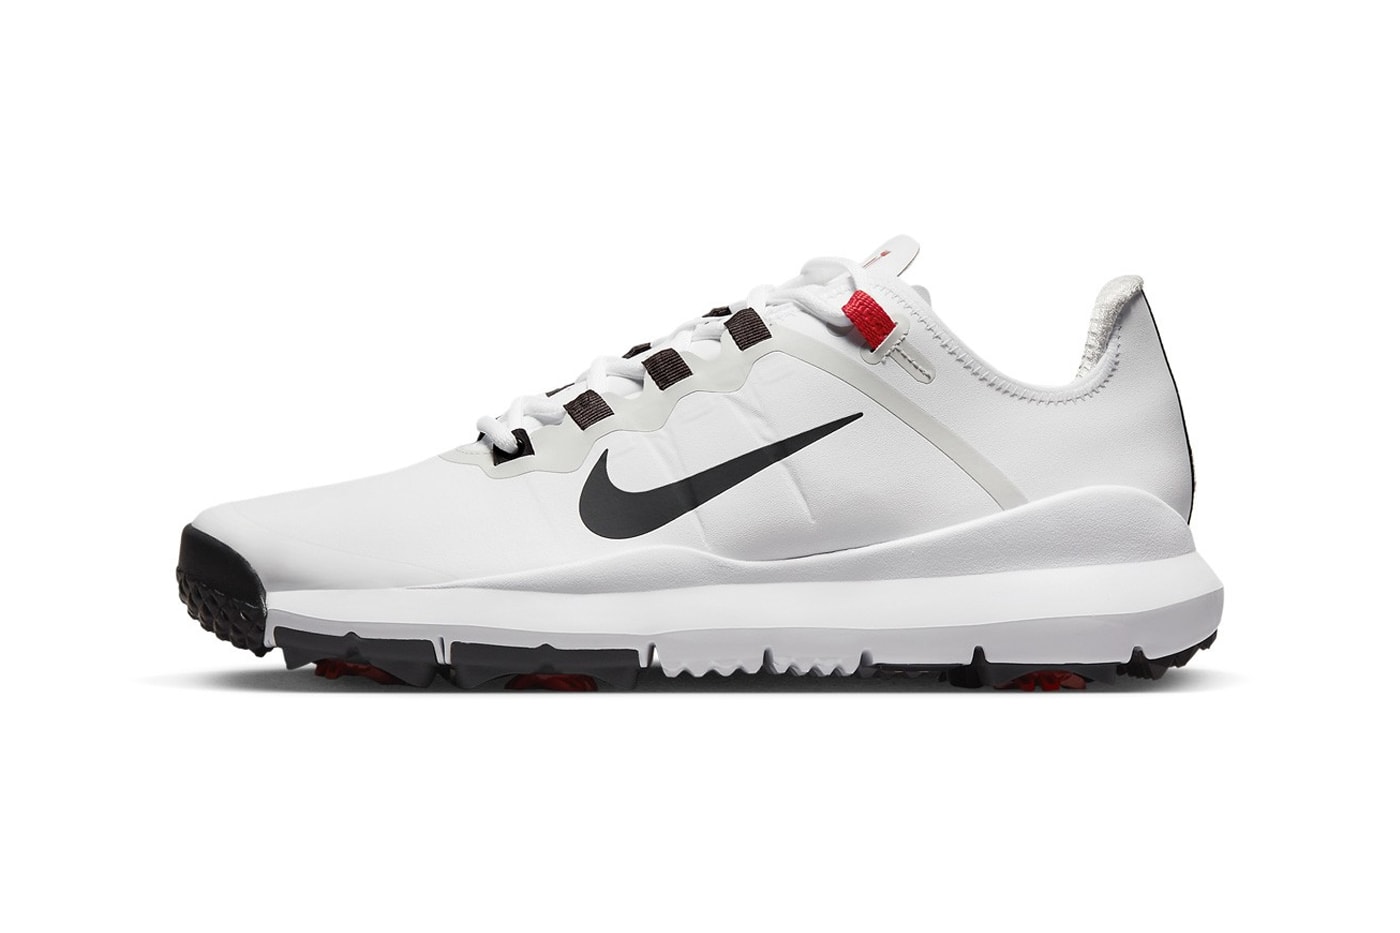 The Nike Tiger Woods '13 Makes Its Return | Hypebeast